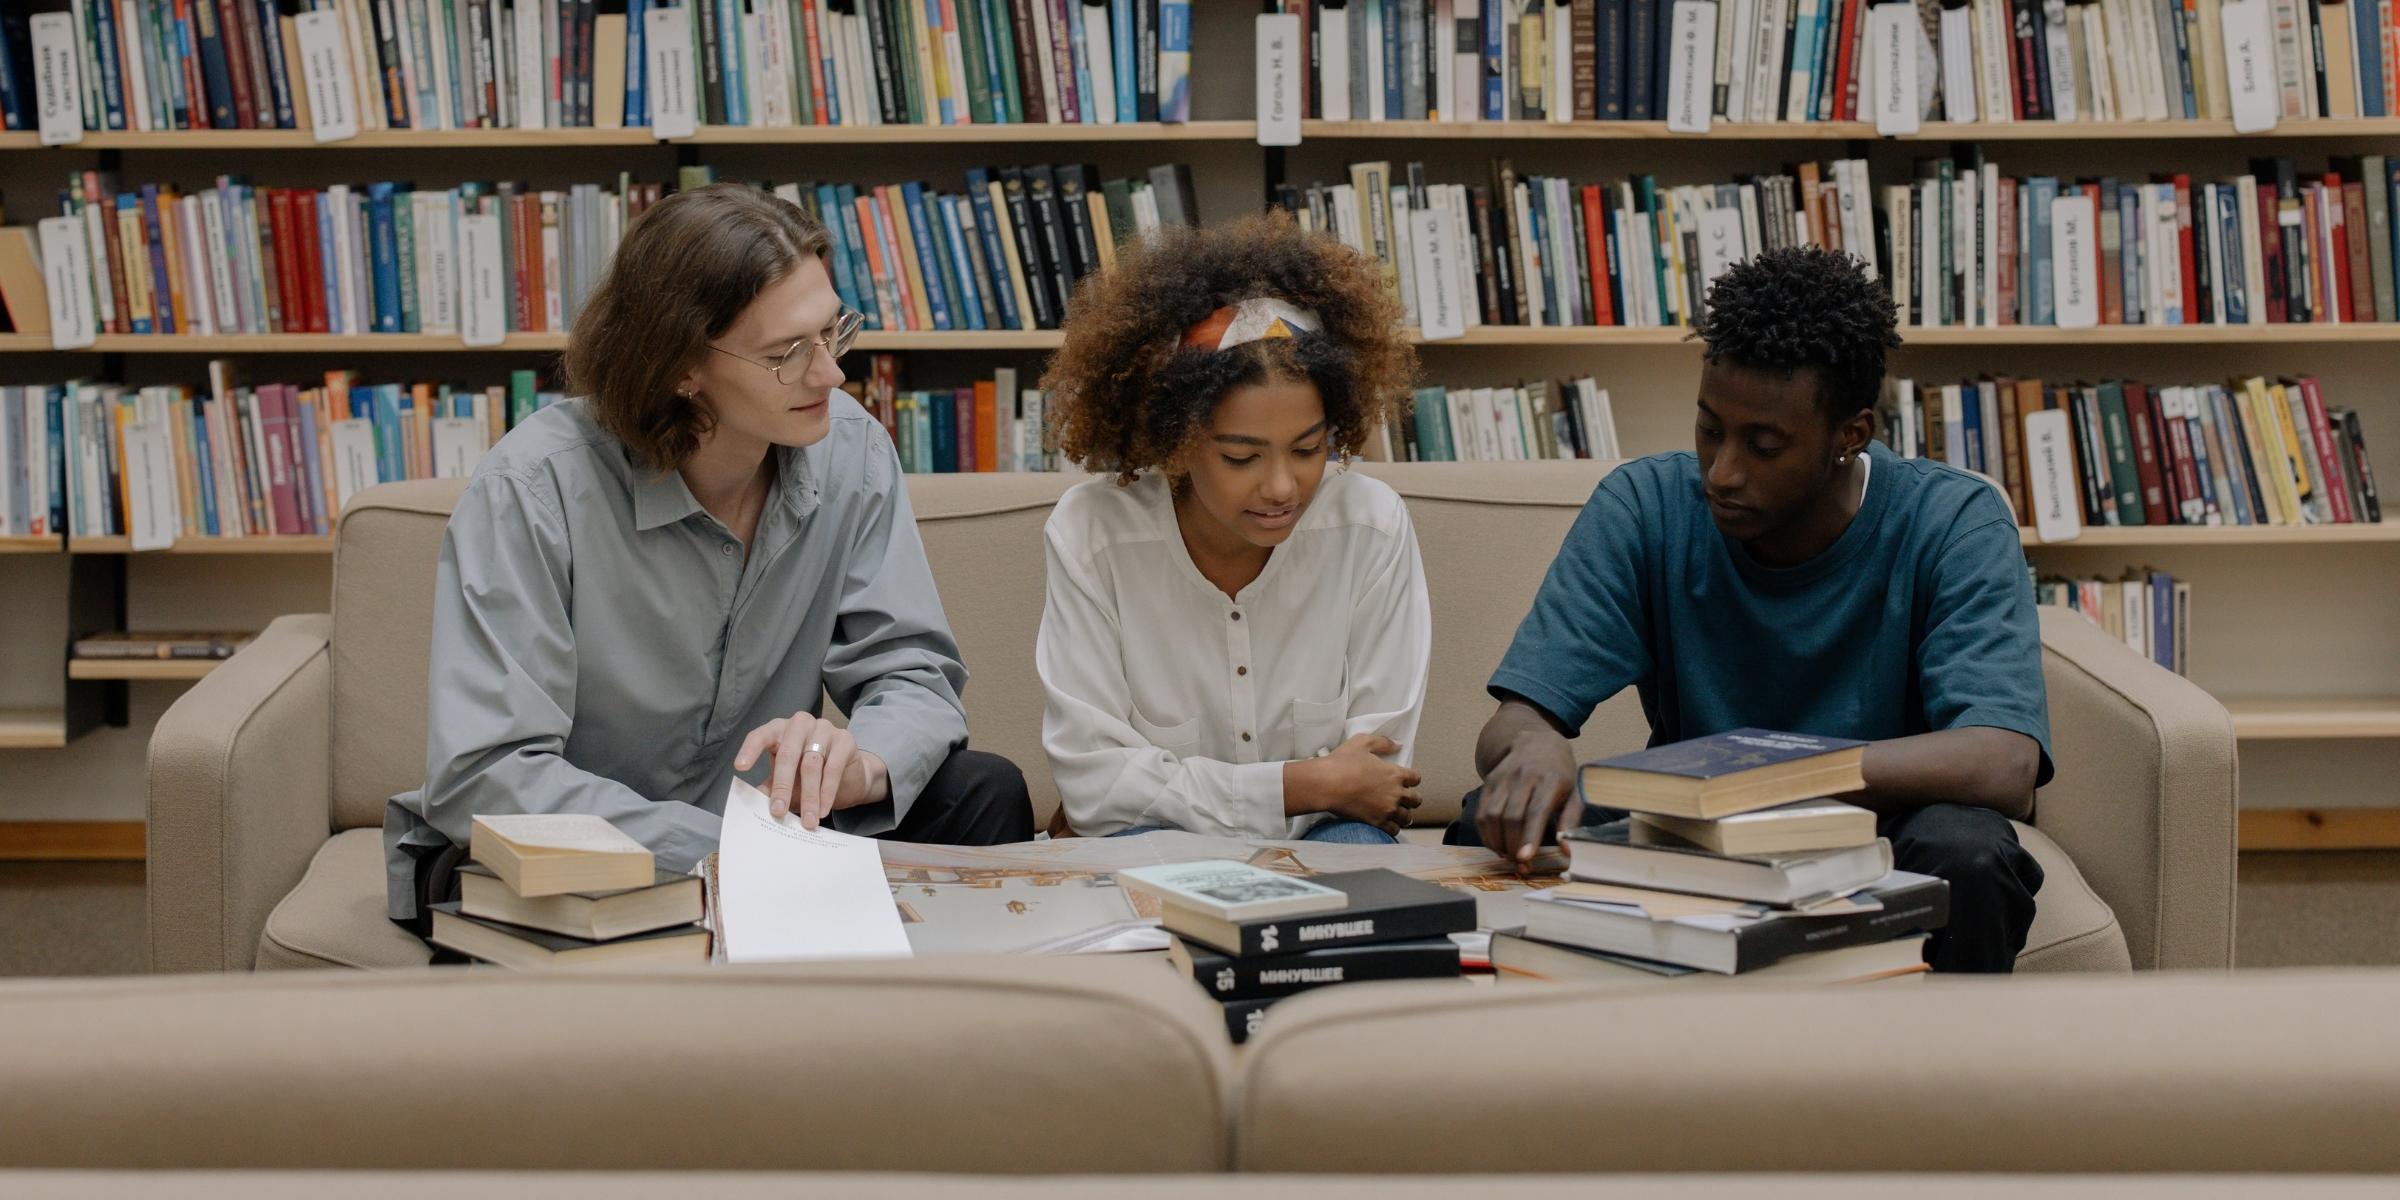 three students sitting on a couch in a library and talking as they look at books on a table together